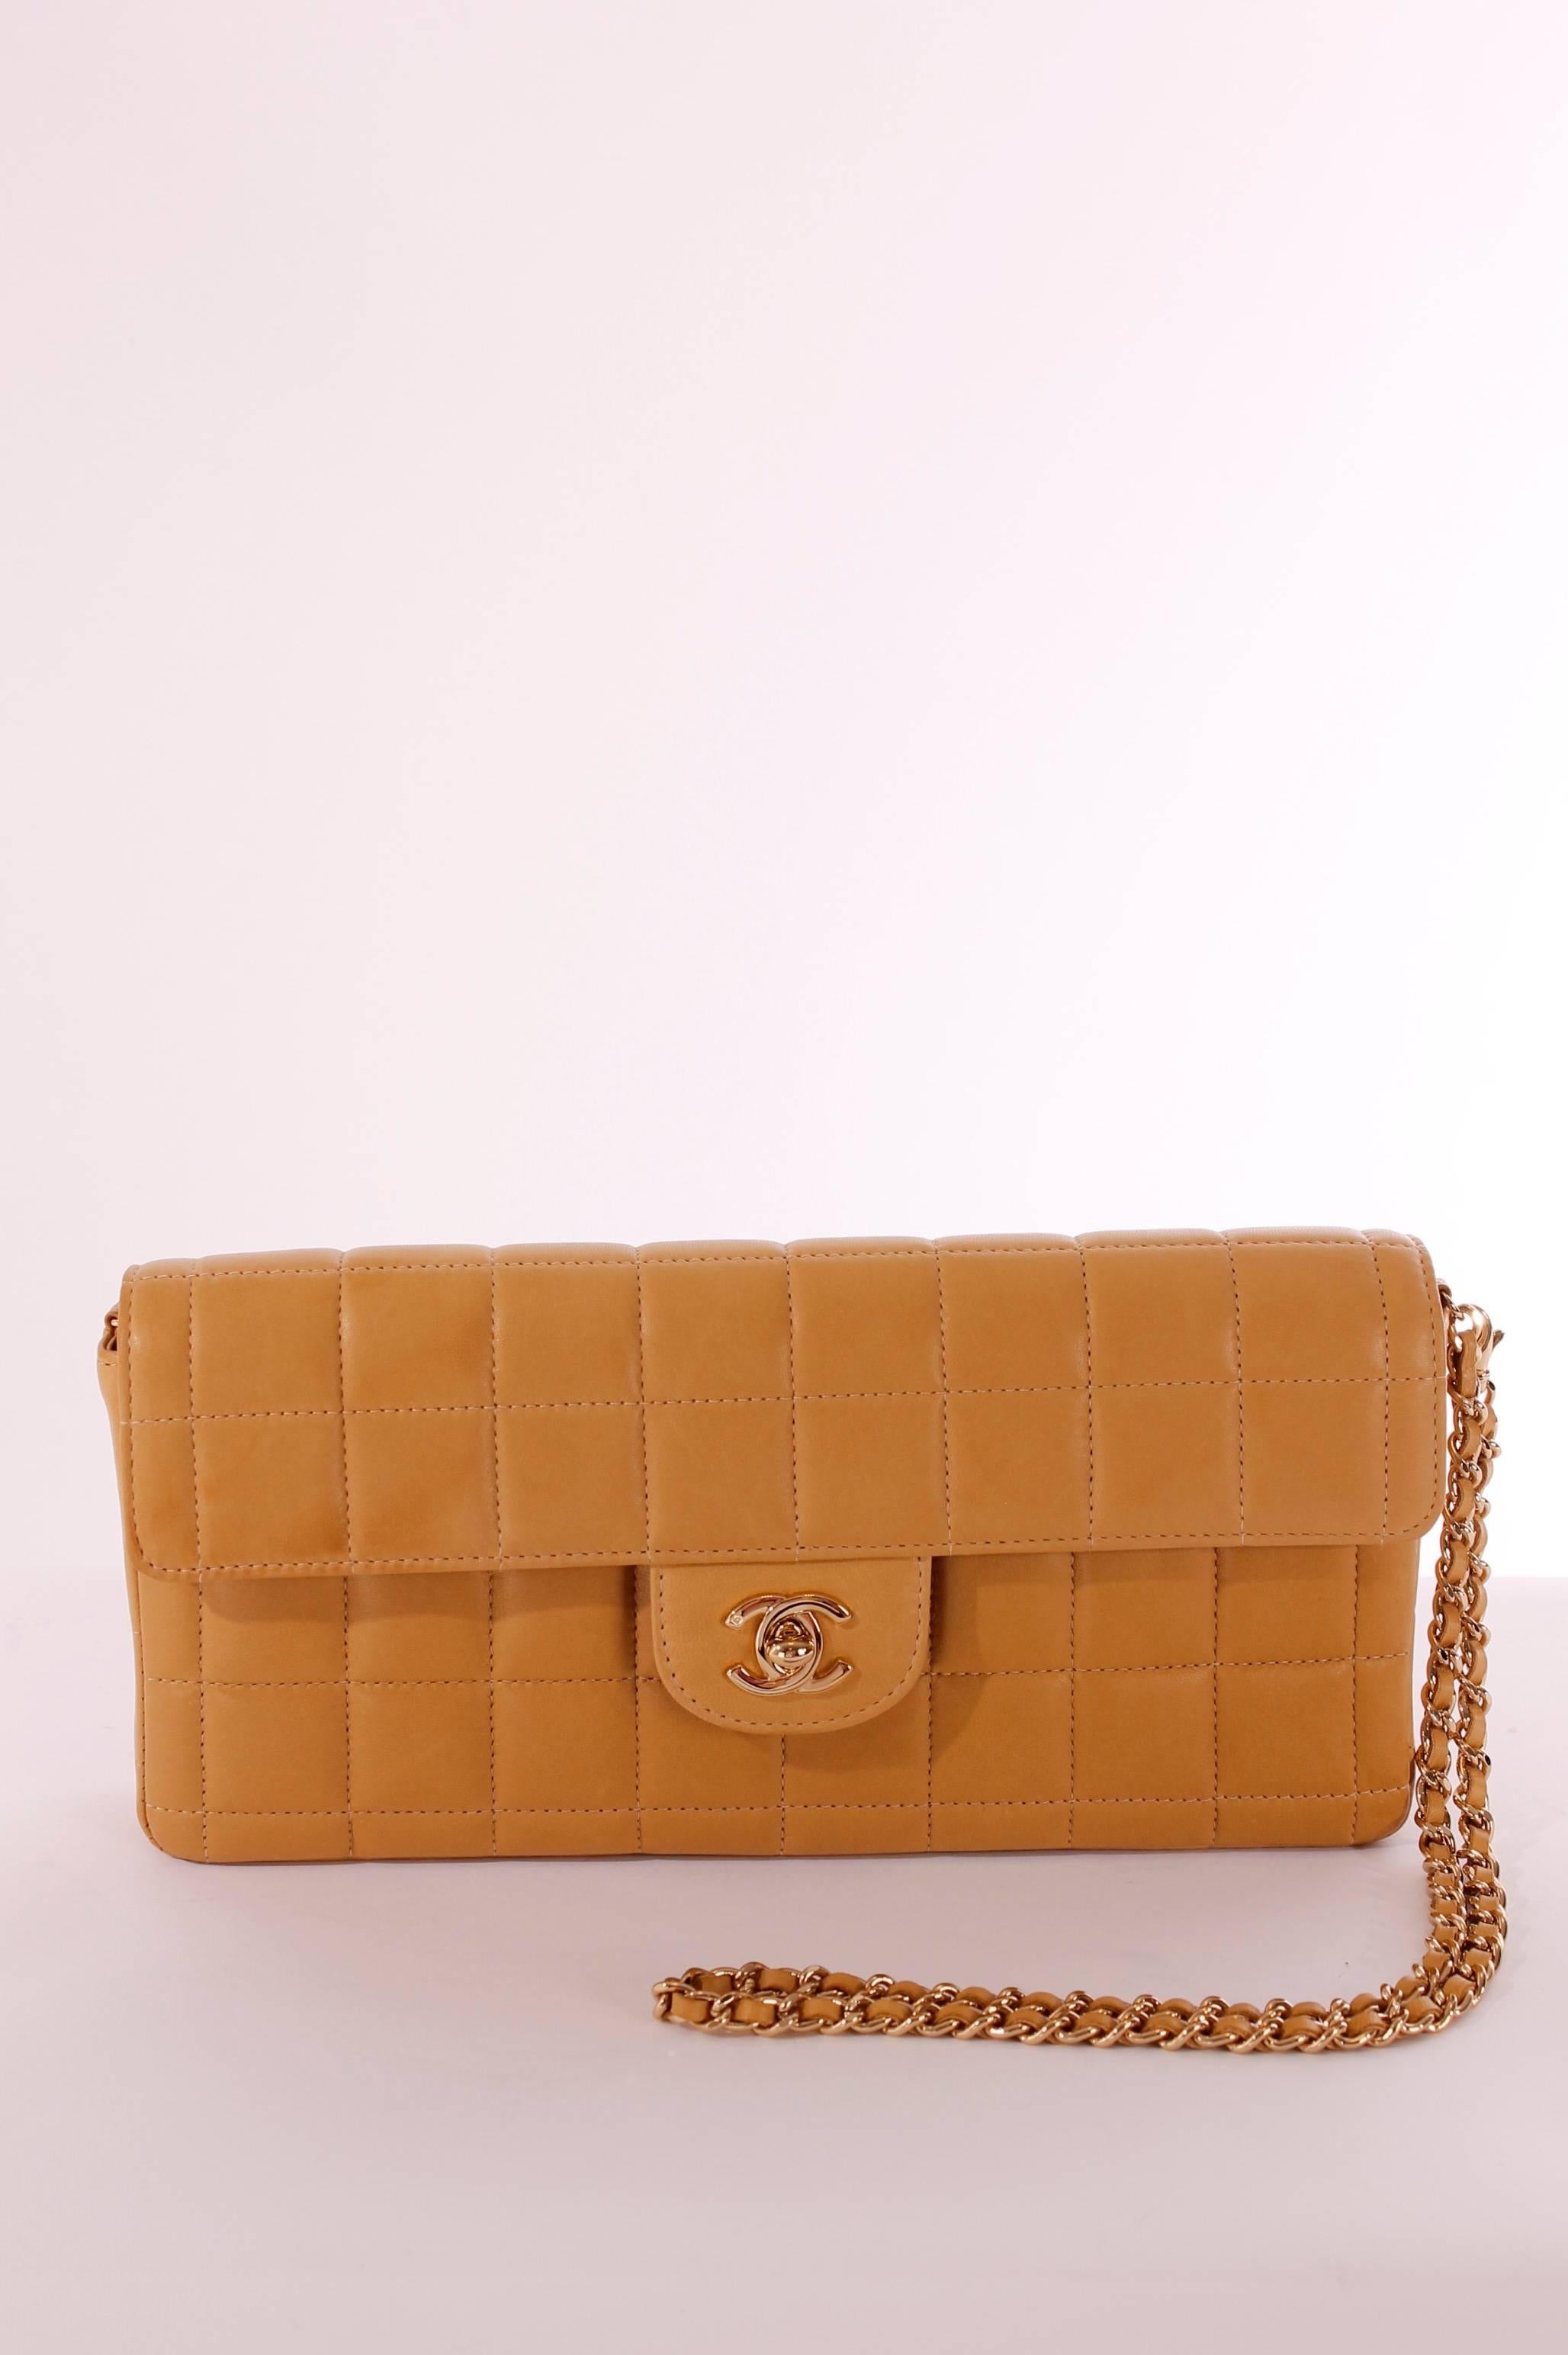 2003 Chanel East West Baguette Flap Clutch Bag in camel coloured lambskin leather, adorable!

This bag was considered the little sister of the Chanel Classic Flap Bag. The style is quite similar, and we love it!

Very rare, because this model